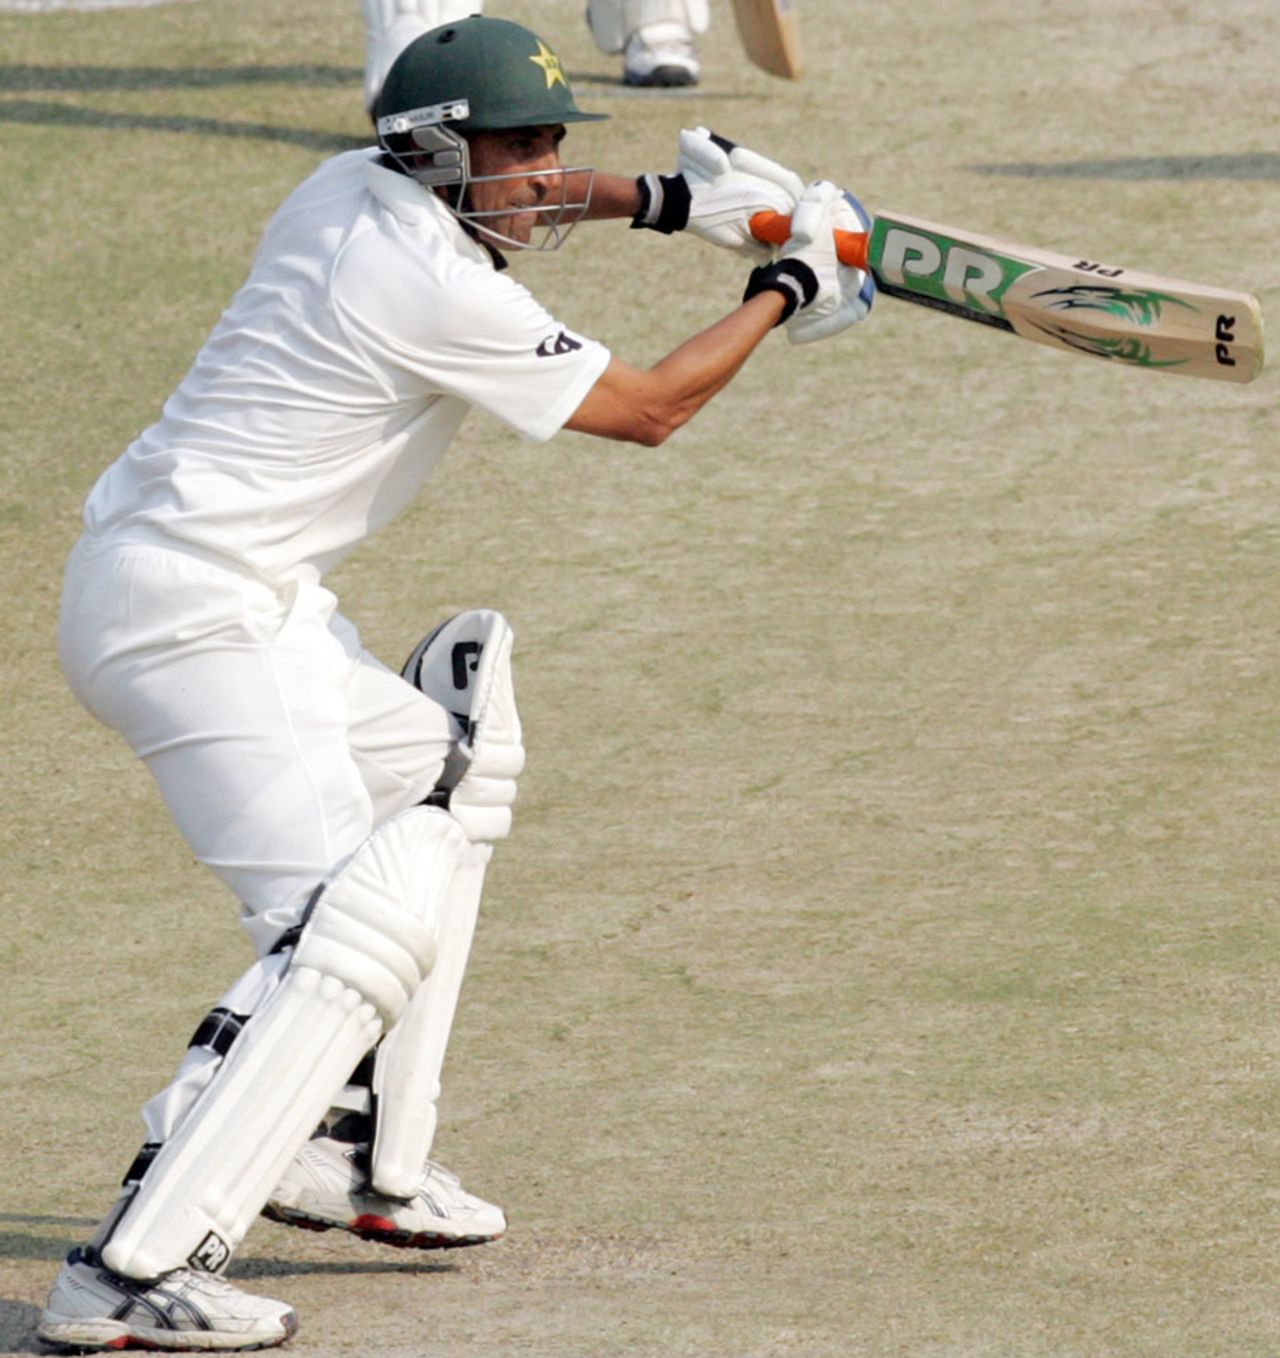 Younis Khan was bowled by Brian Vitori for 29, Zimbabwe v Pakistan, 2nd Test, Harare, 4th day, September 13, 2013